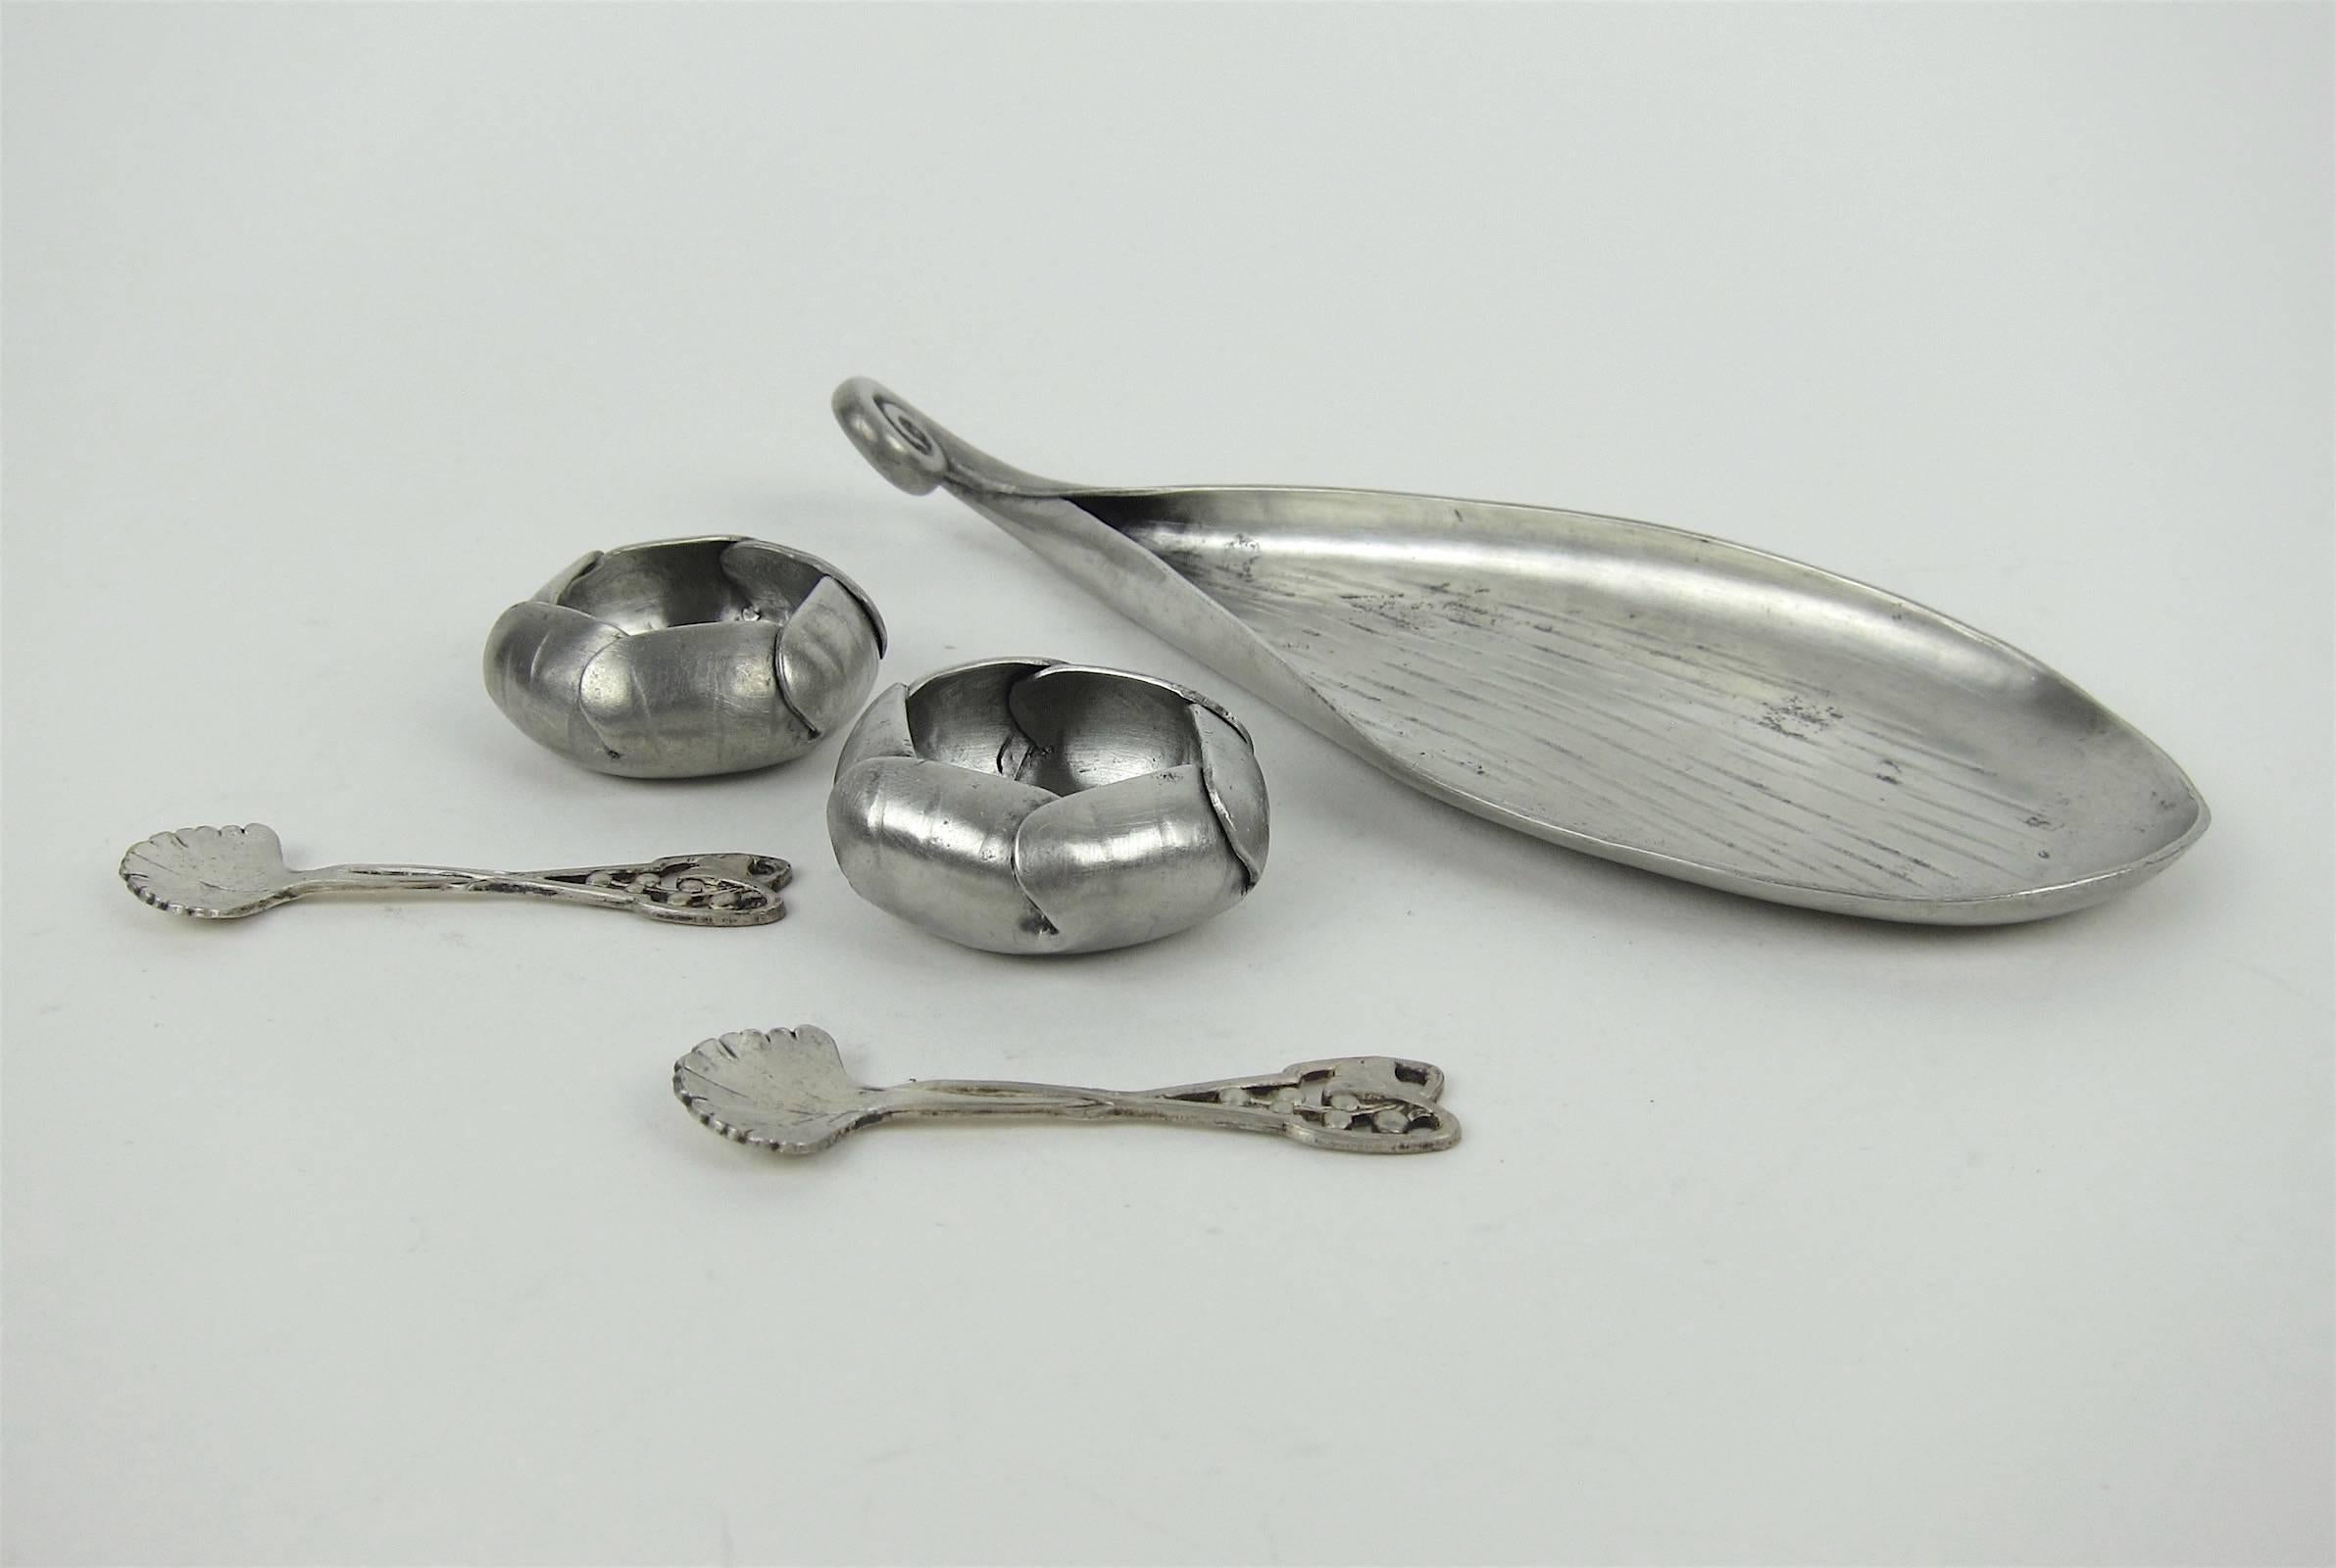 20th Century A E Chanal French Art Nouveau Open Salt Set in Hand-Wrought Pewter